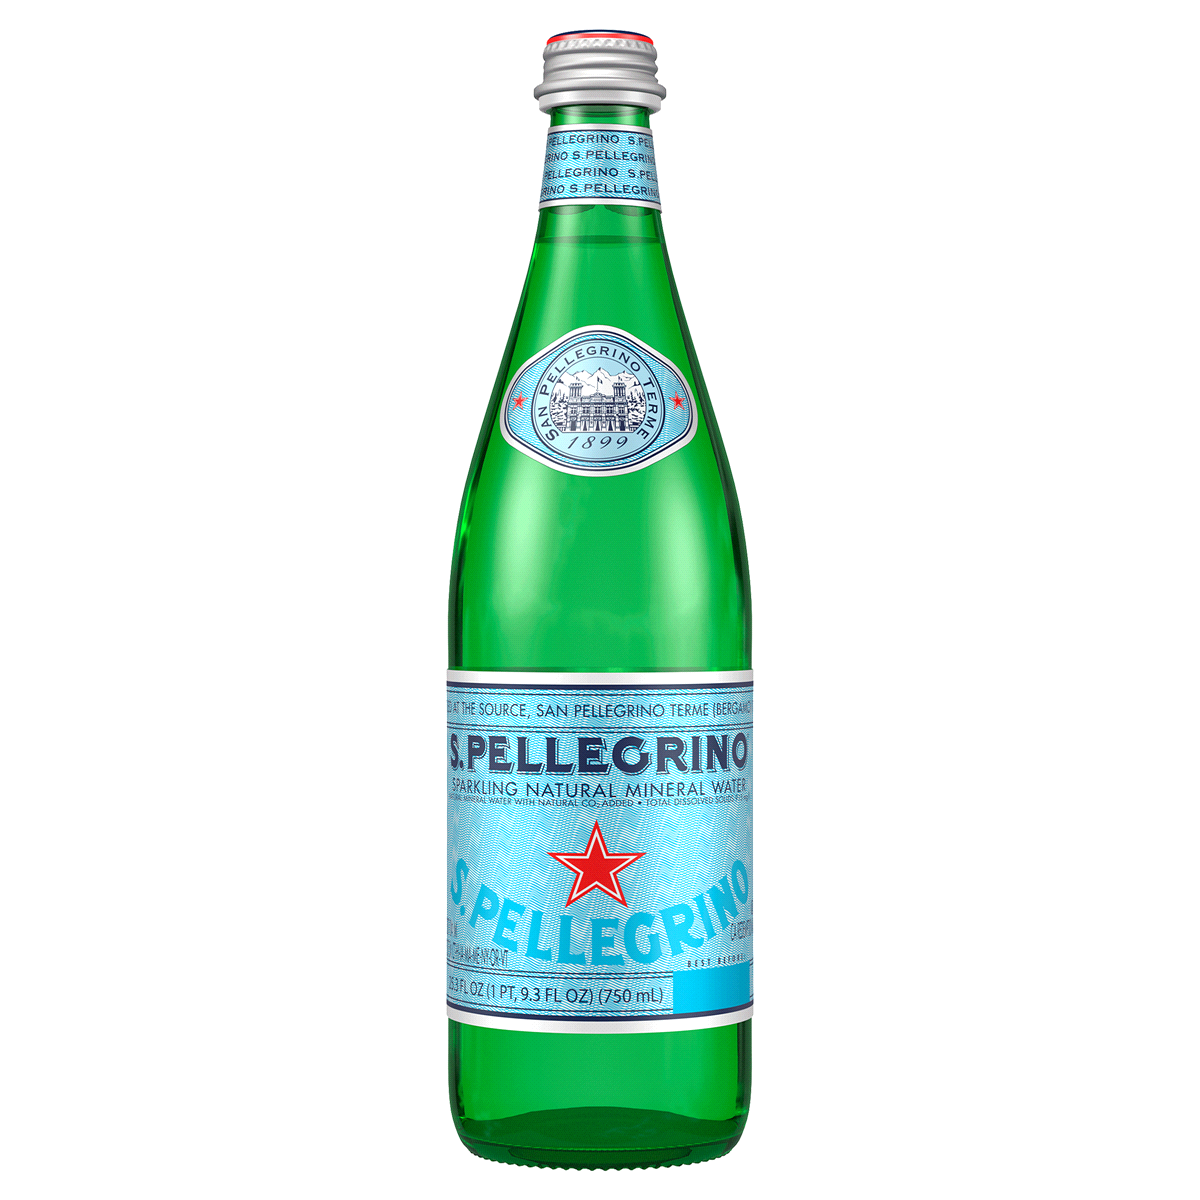 S. Pellegrino Sparking Natural Mineral Water 750ml